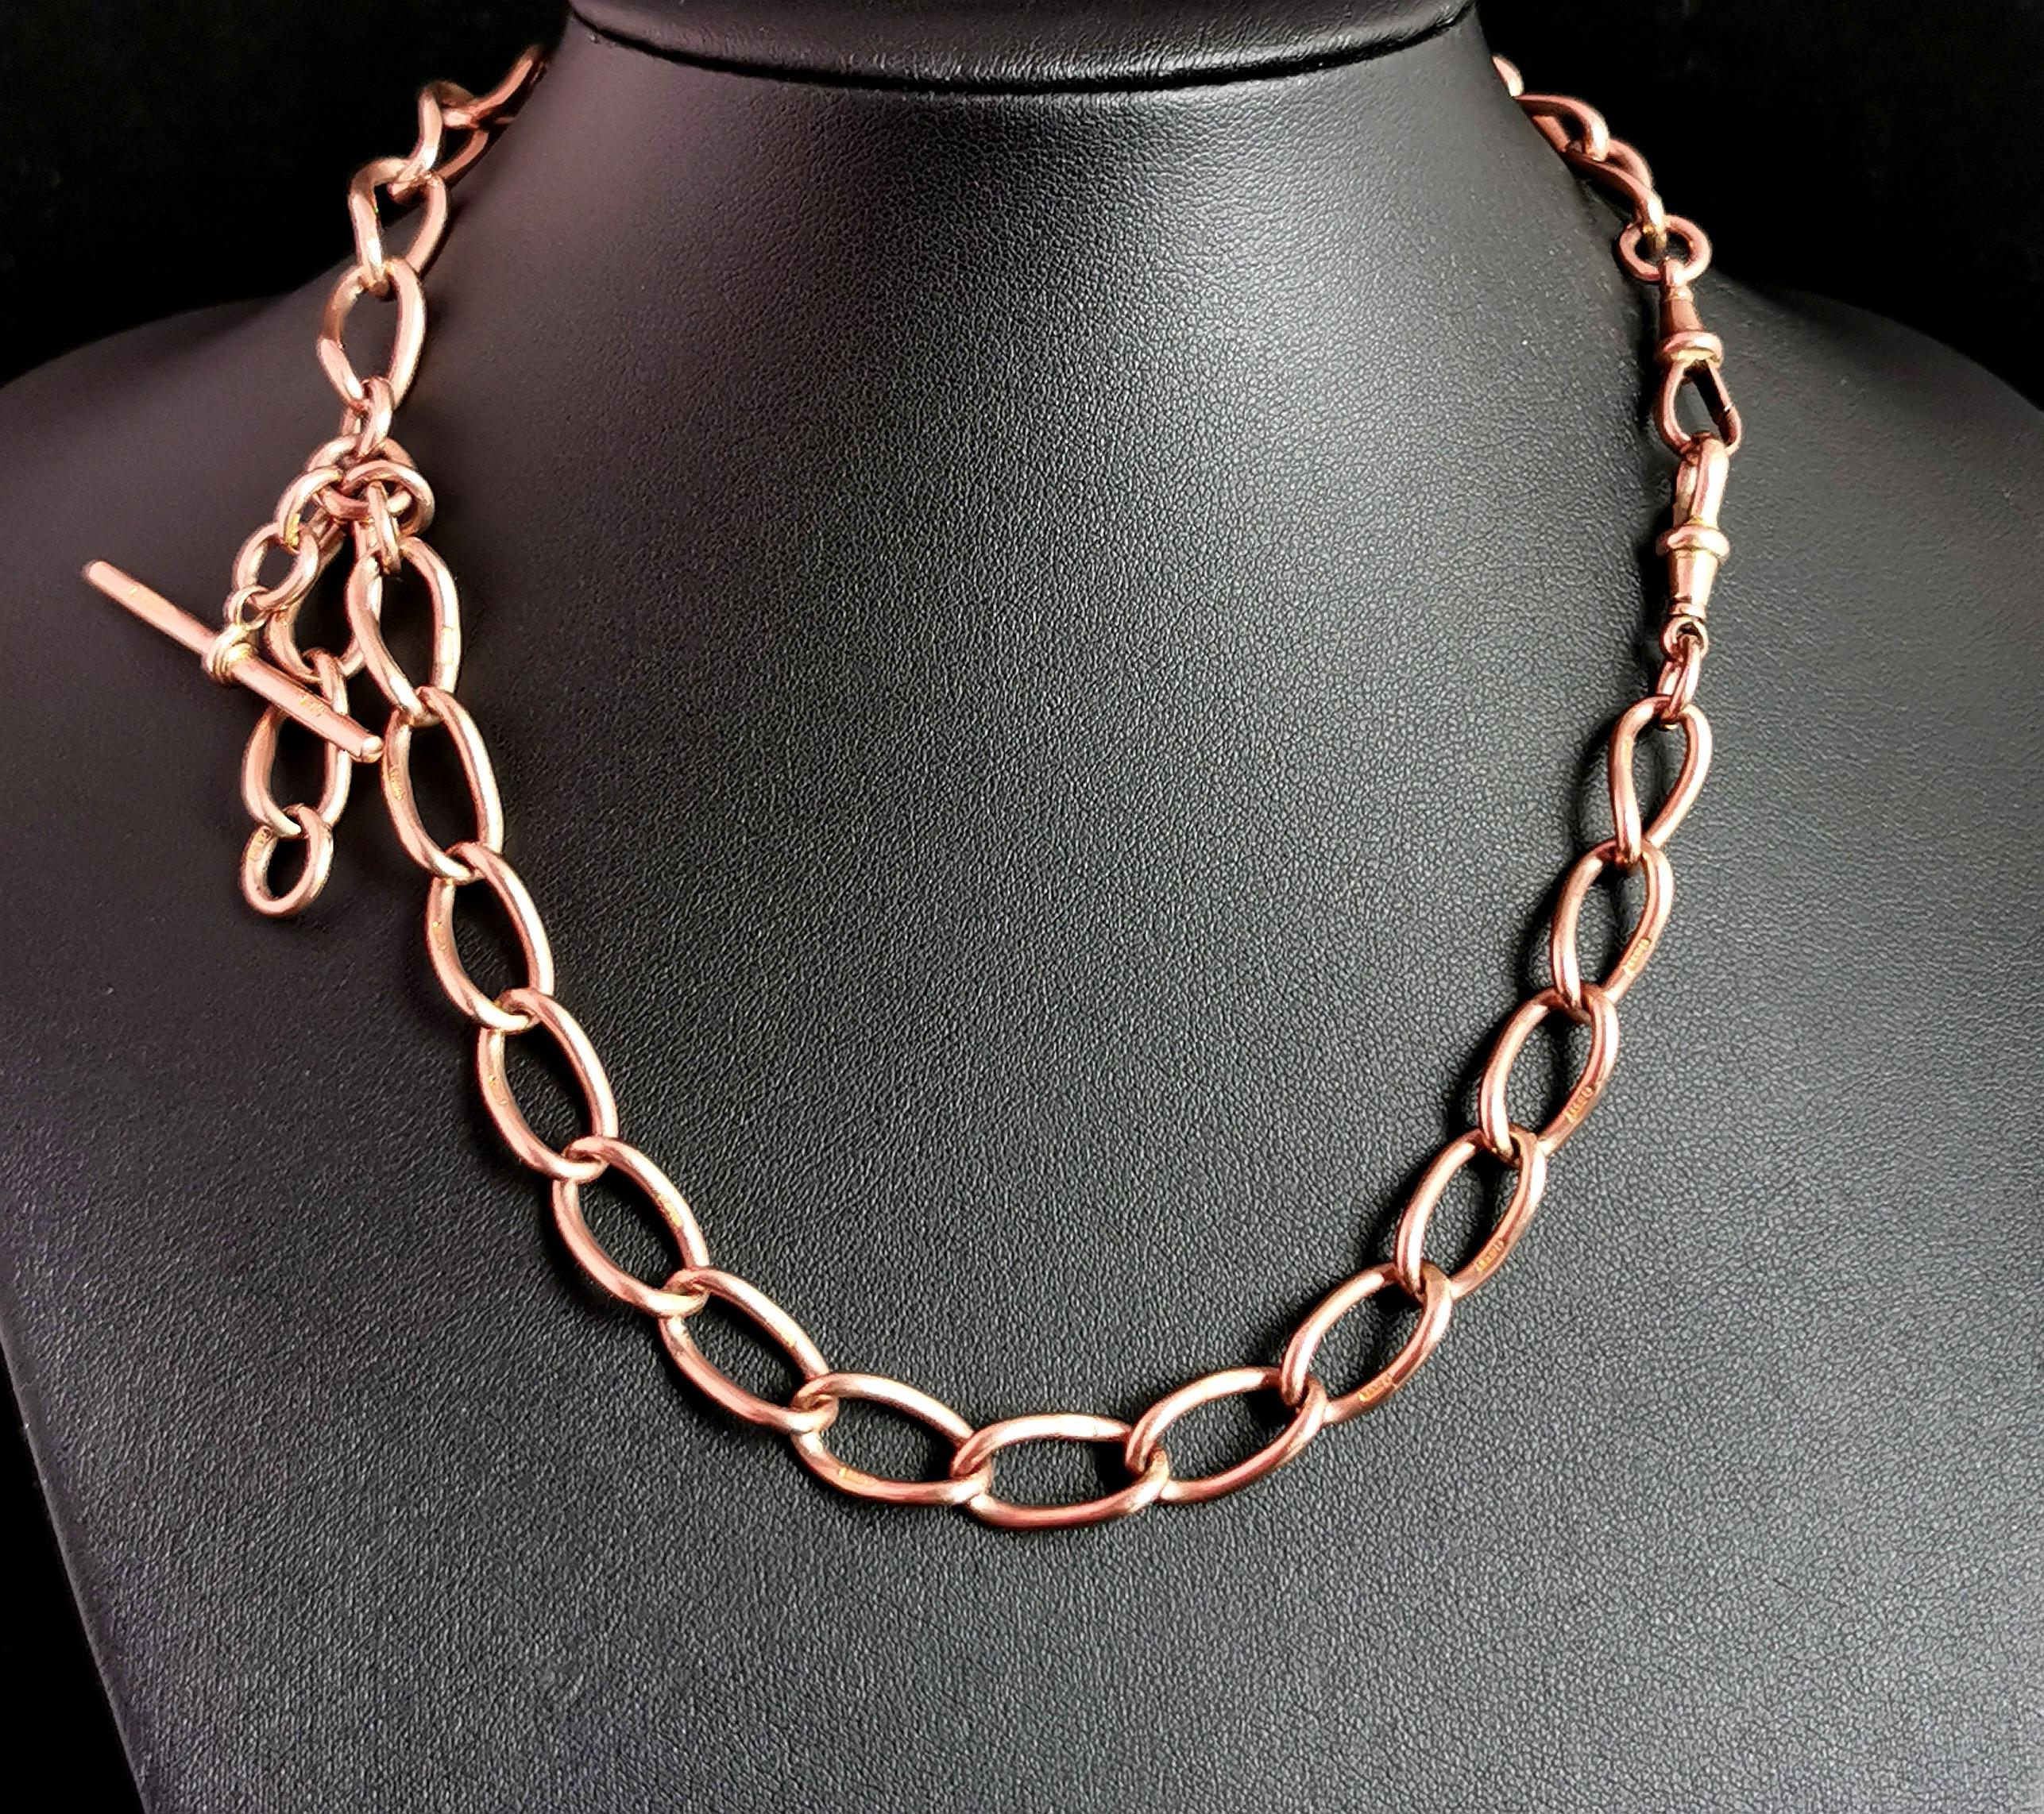 A gorgeous antique 9kt Rose gold Albert chain or watch chain.

It has beautiful elongated curb links with a light rosey overtone, each individually stamped for 9kt gold, these stretched curb links make for a wonderful design.

The rose tone is